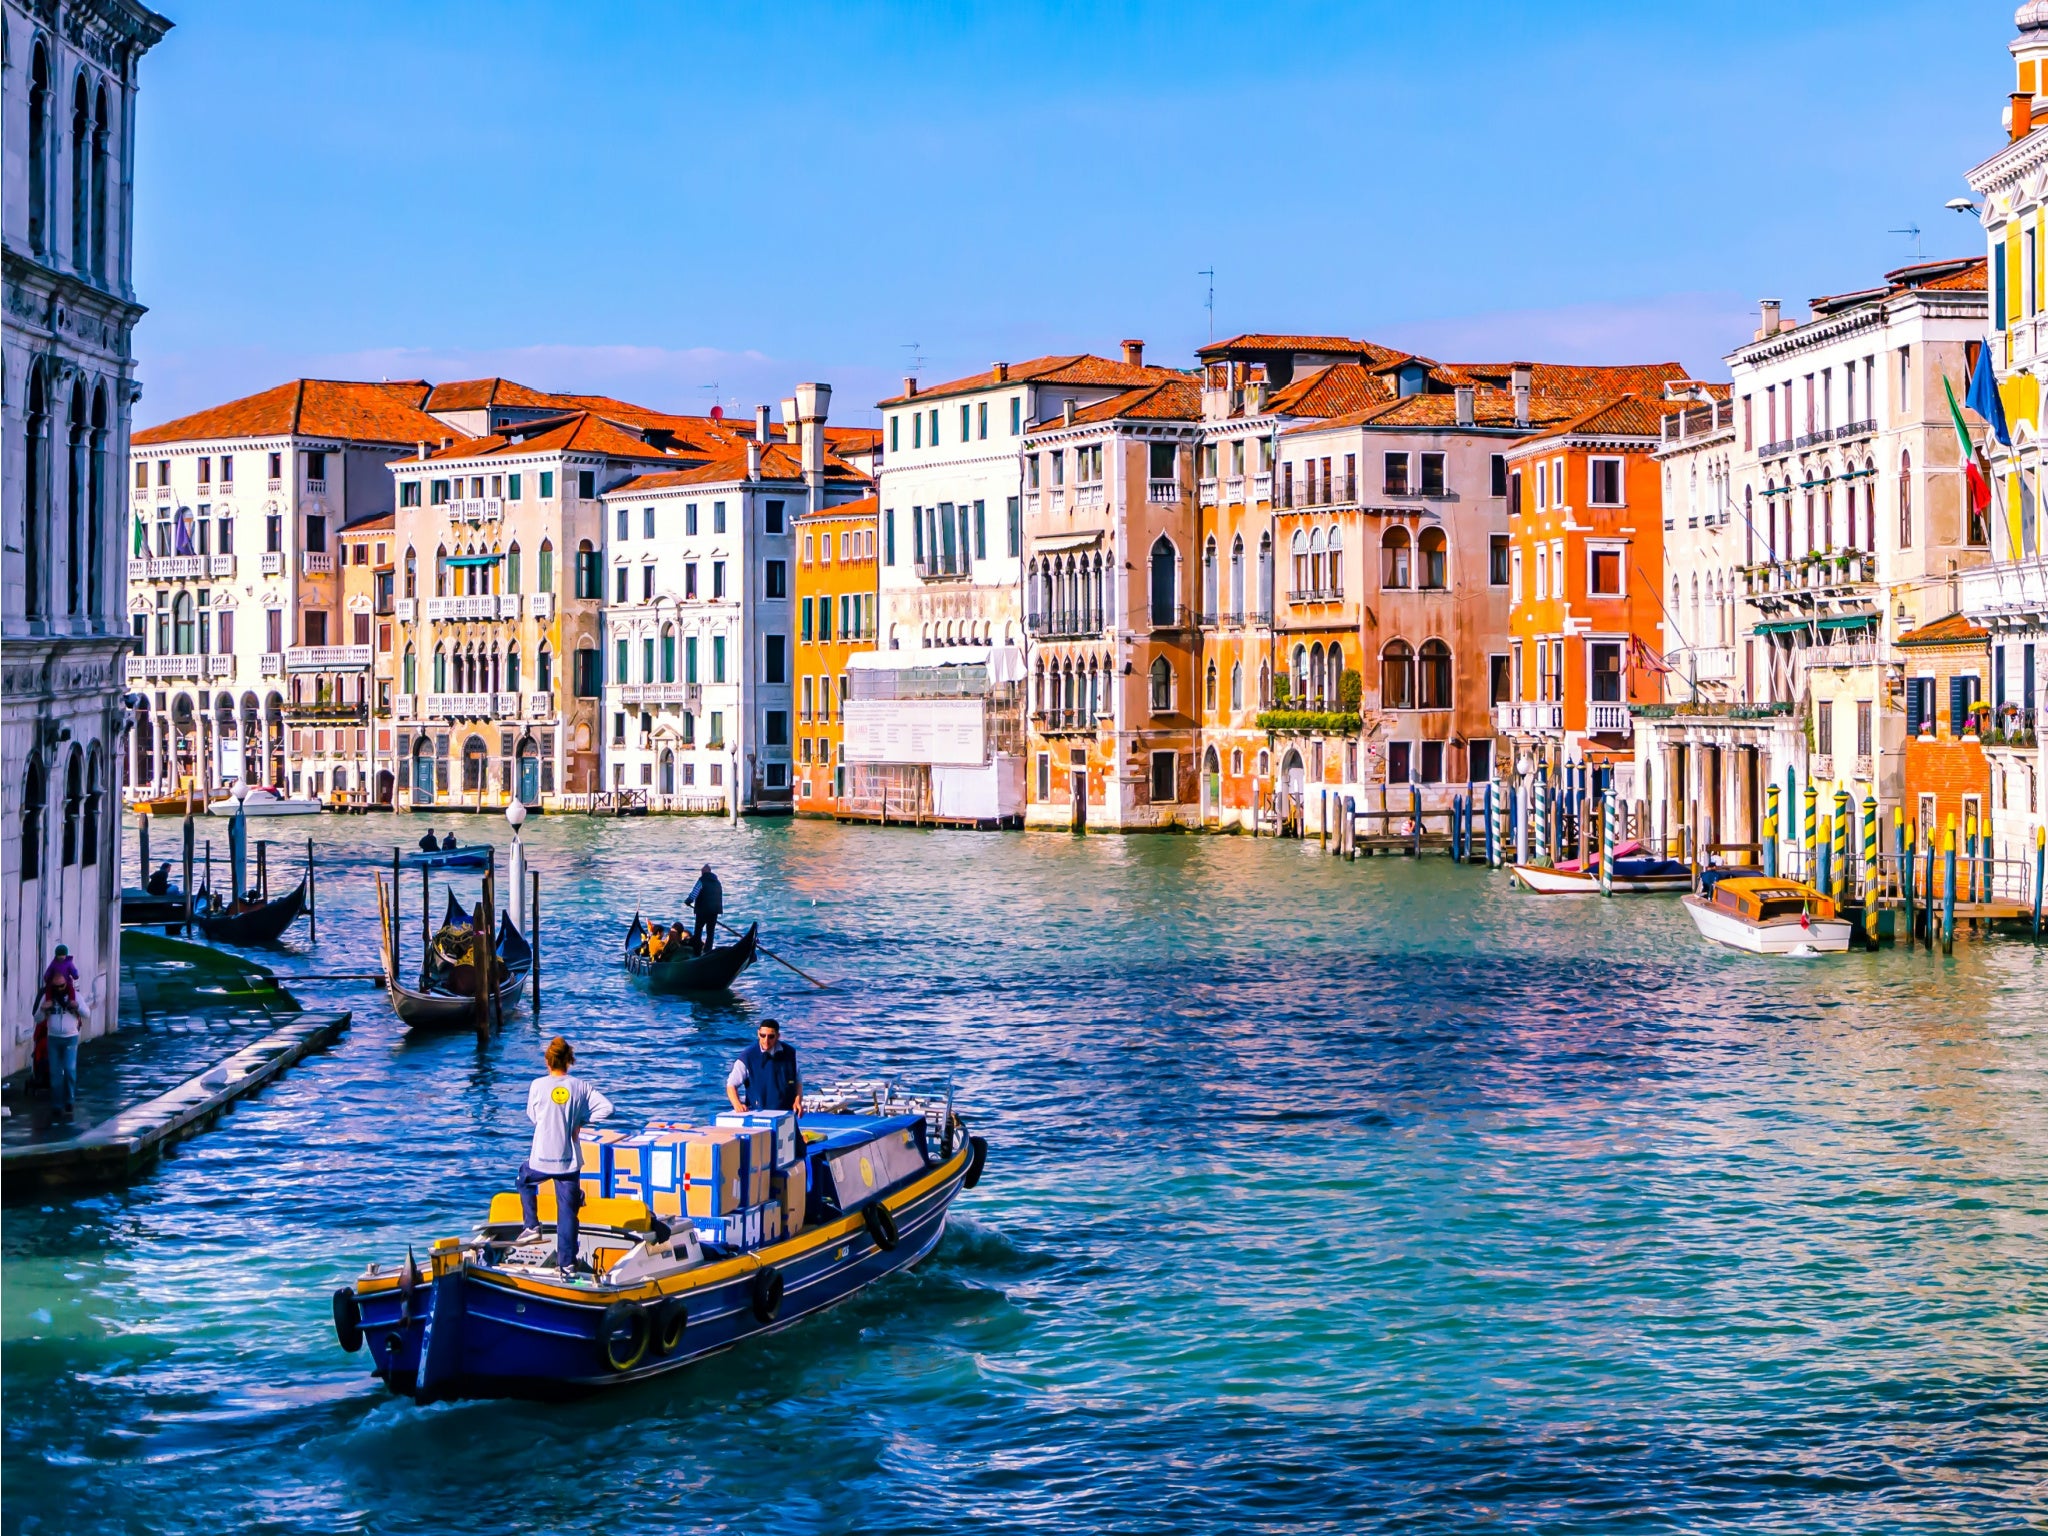 Venice’s canals can be reached by train from London